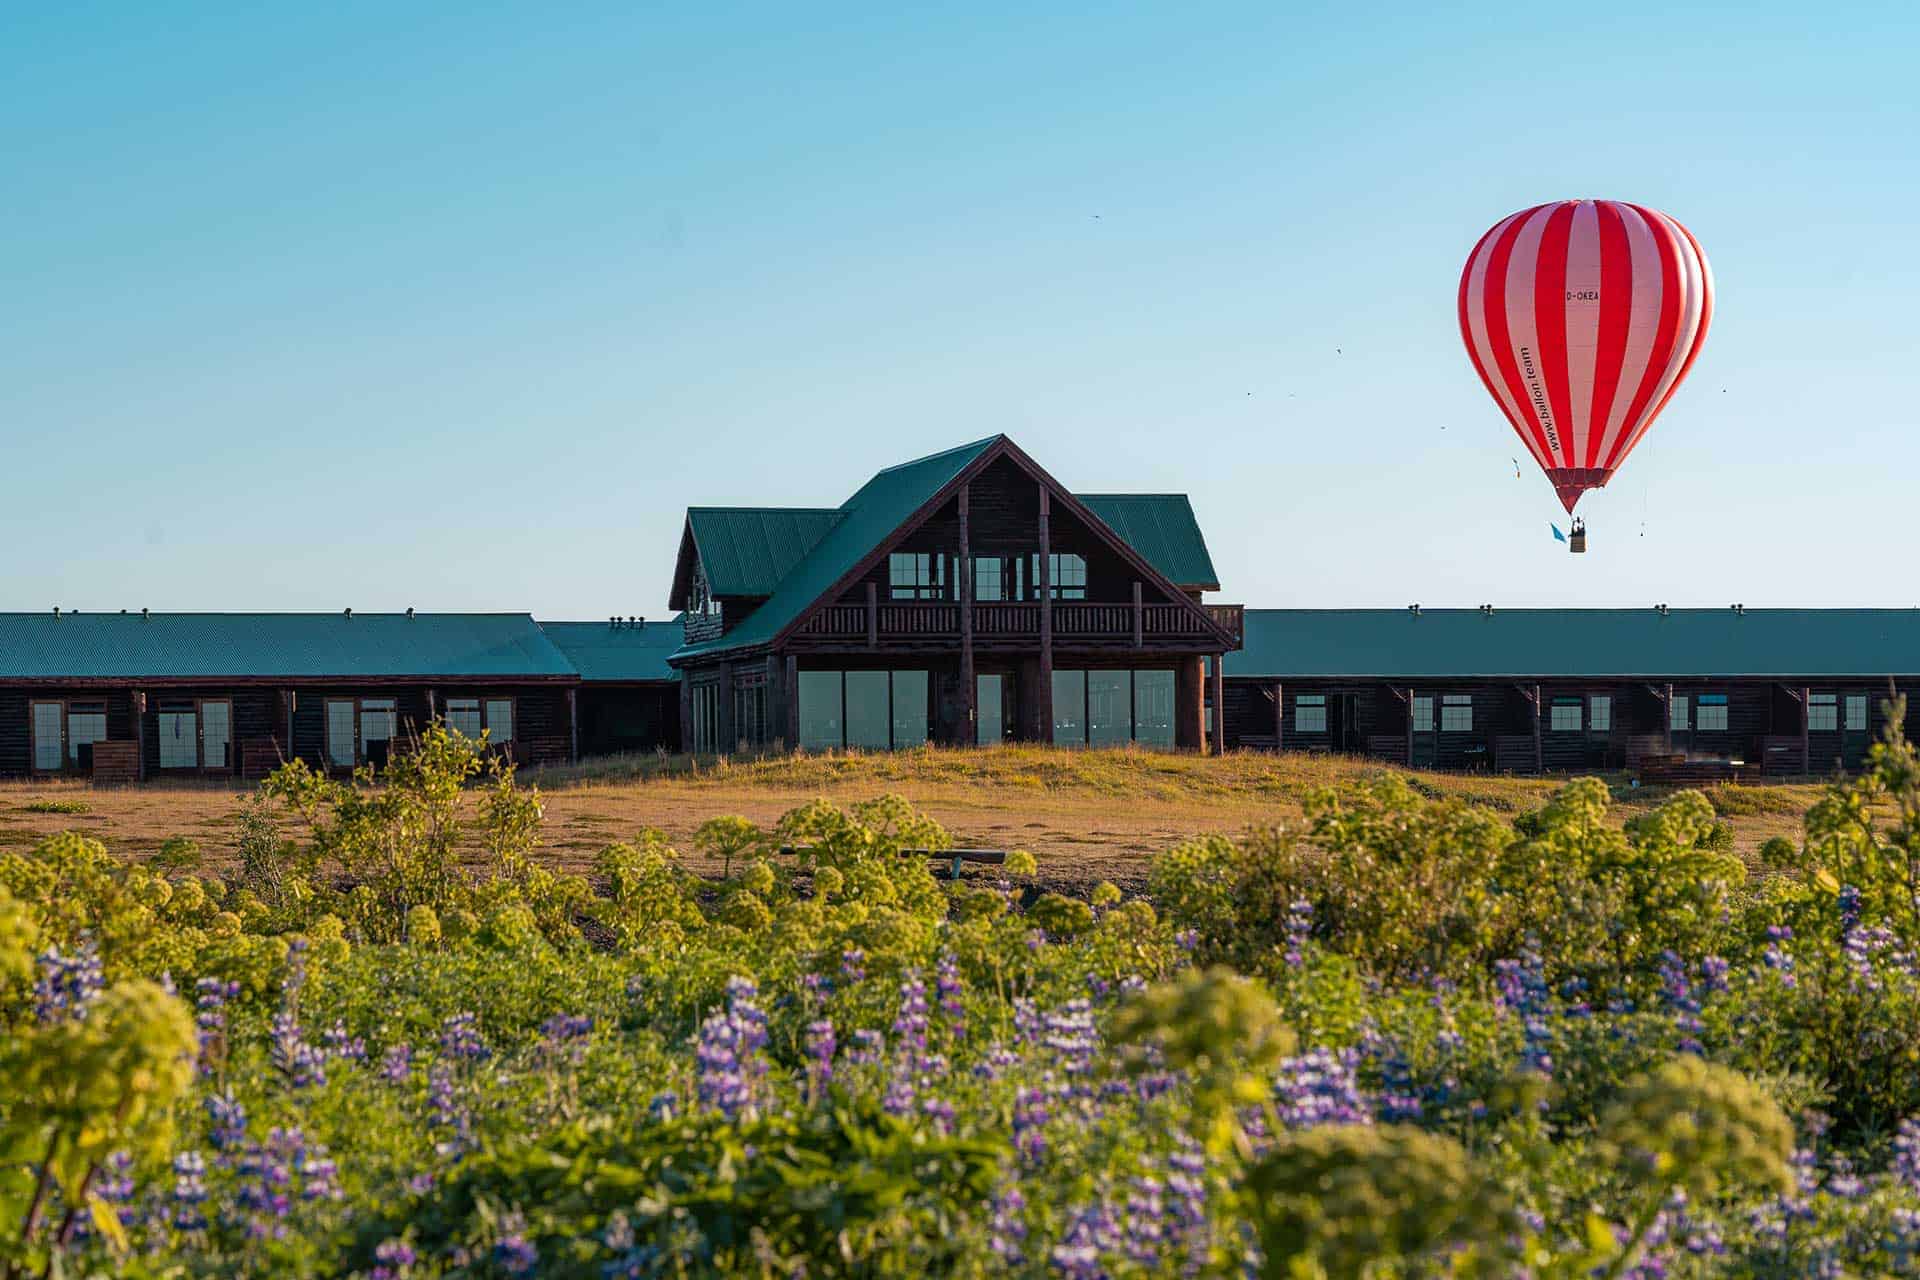 Hotel Rangá during the summertime, surrounded by fields of purple lupine flowers and a hot air balloon overhead. 